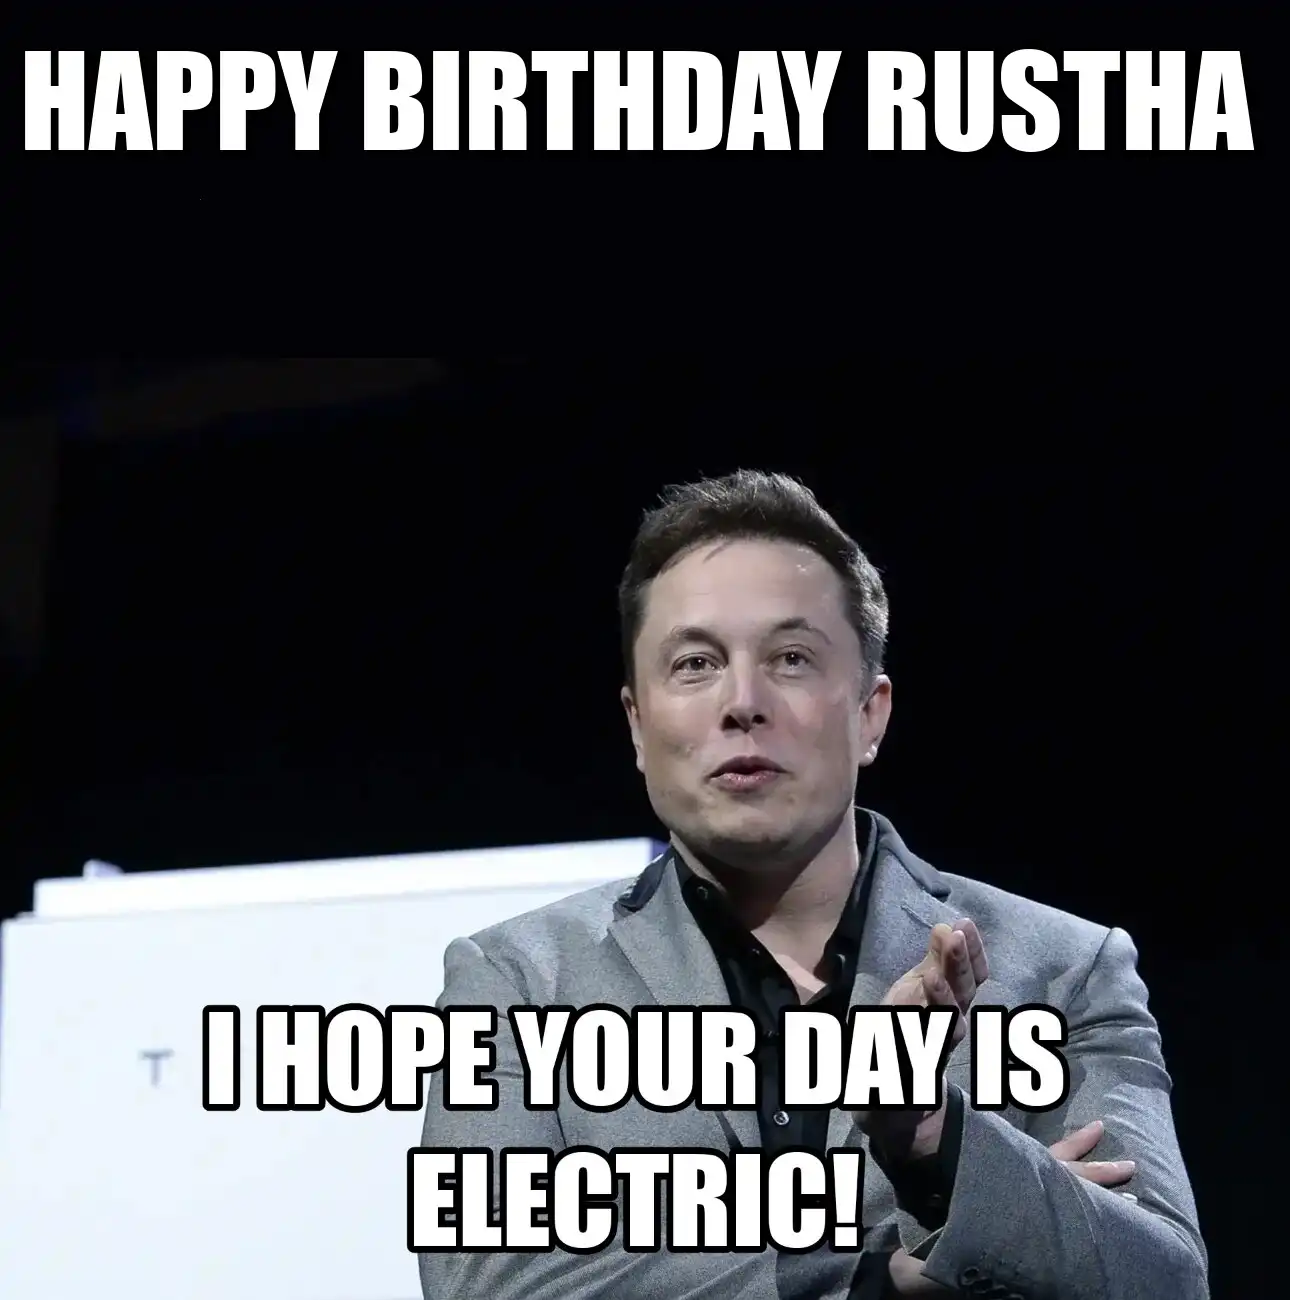 Happy Birthday Rustha I Hope Your Day Is Electric Meme